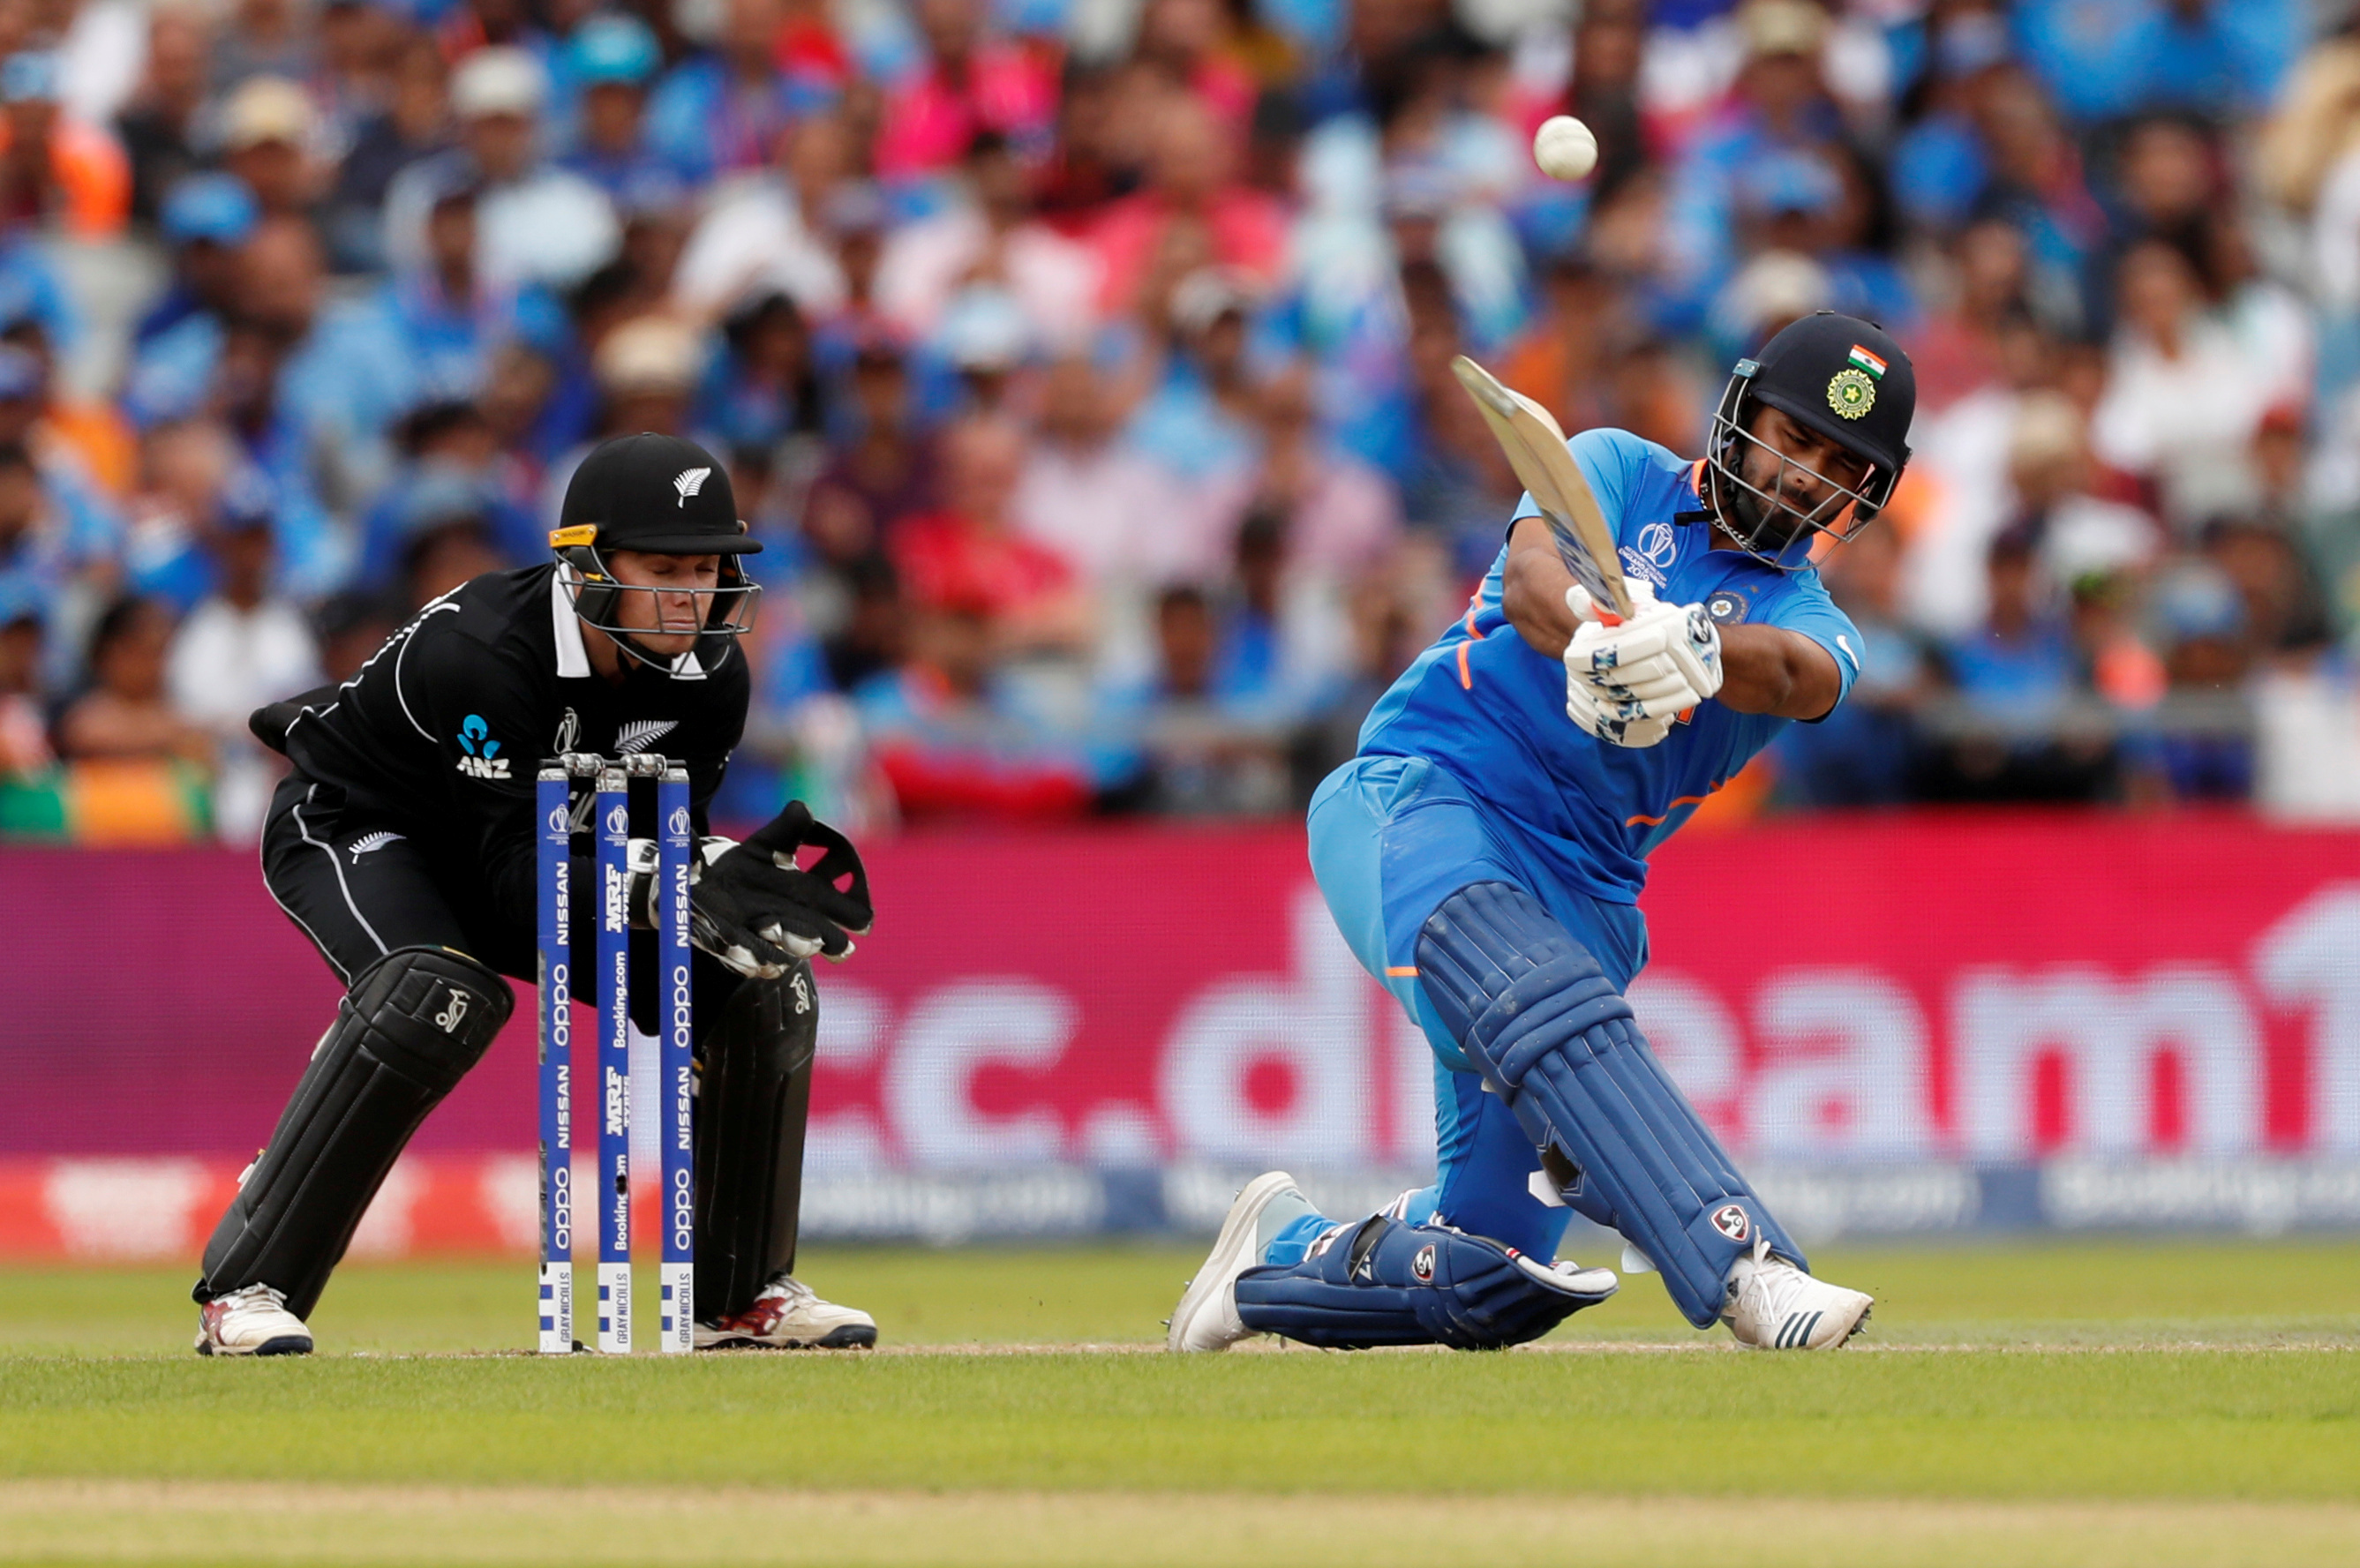 Cricket: India want ‘phenomenal’ Pant to match daredevil batting with